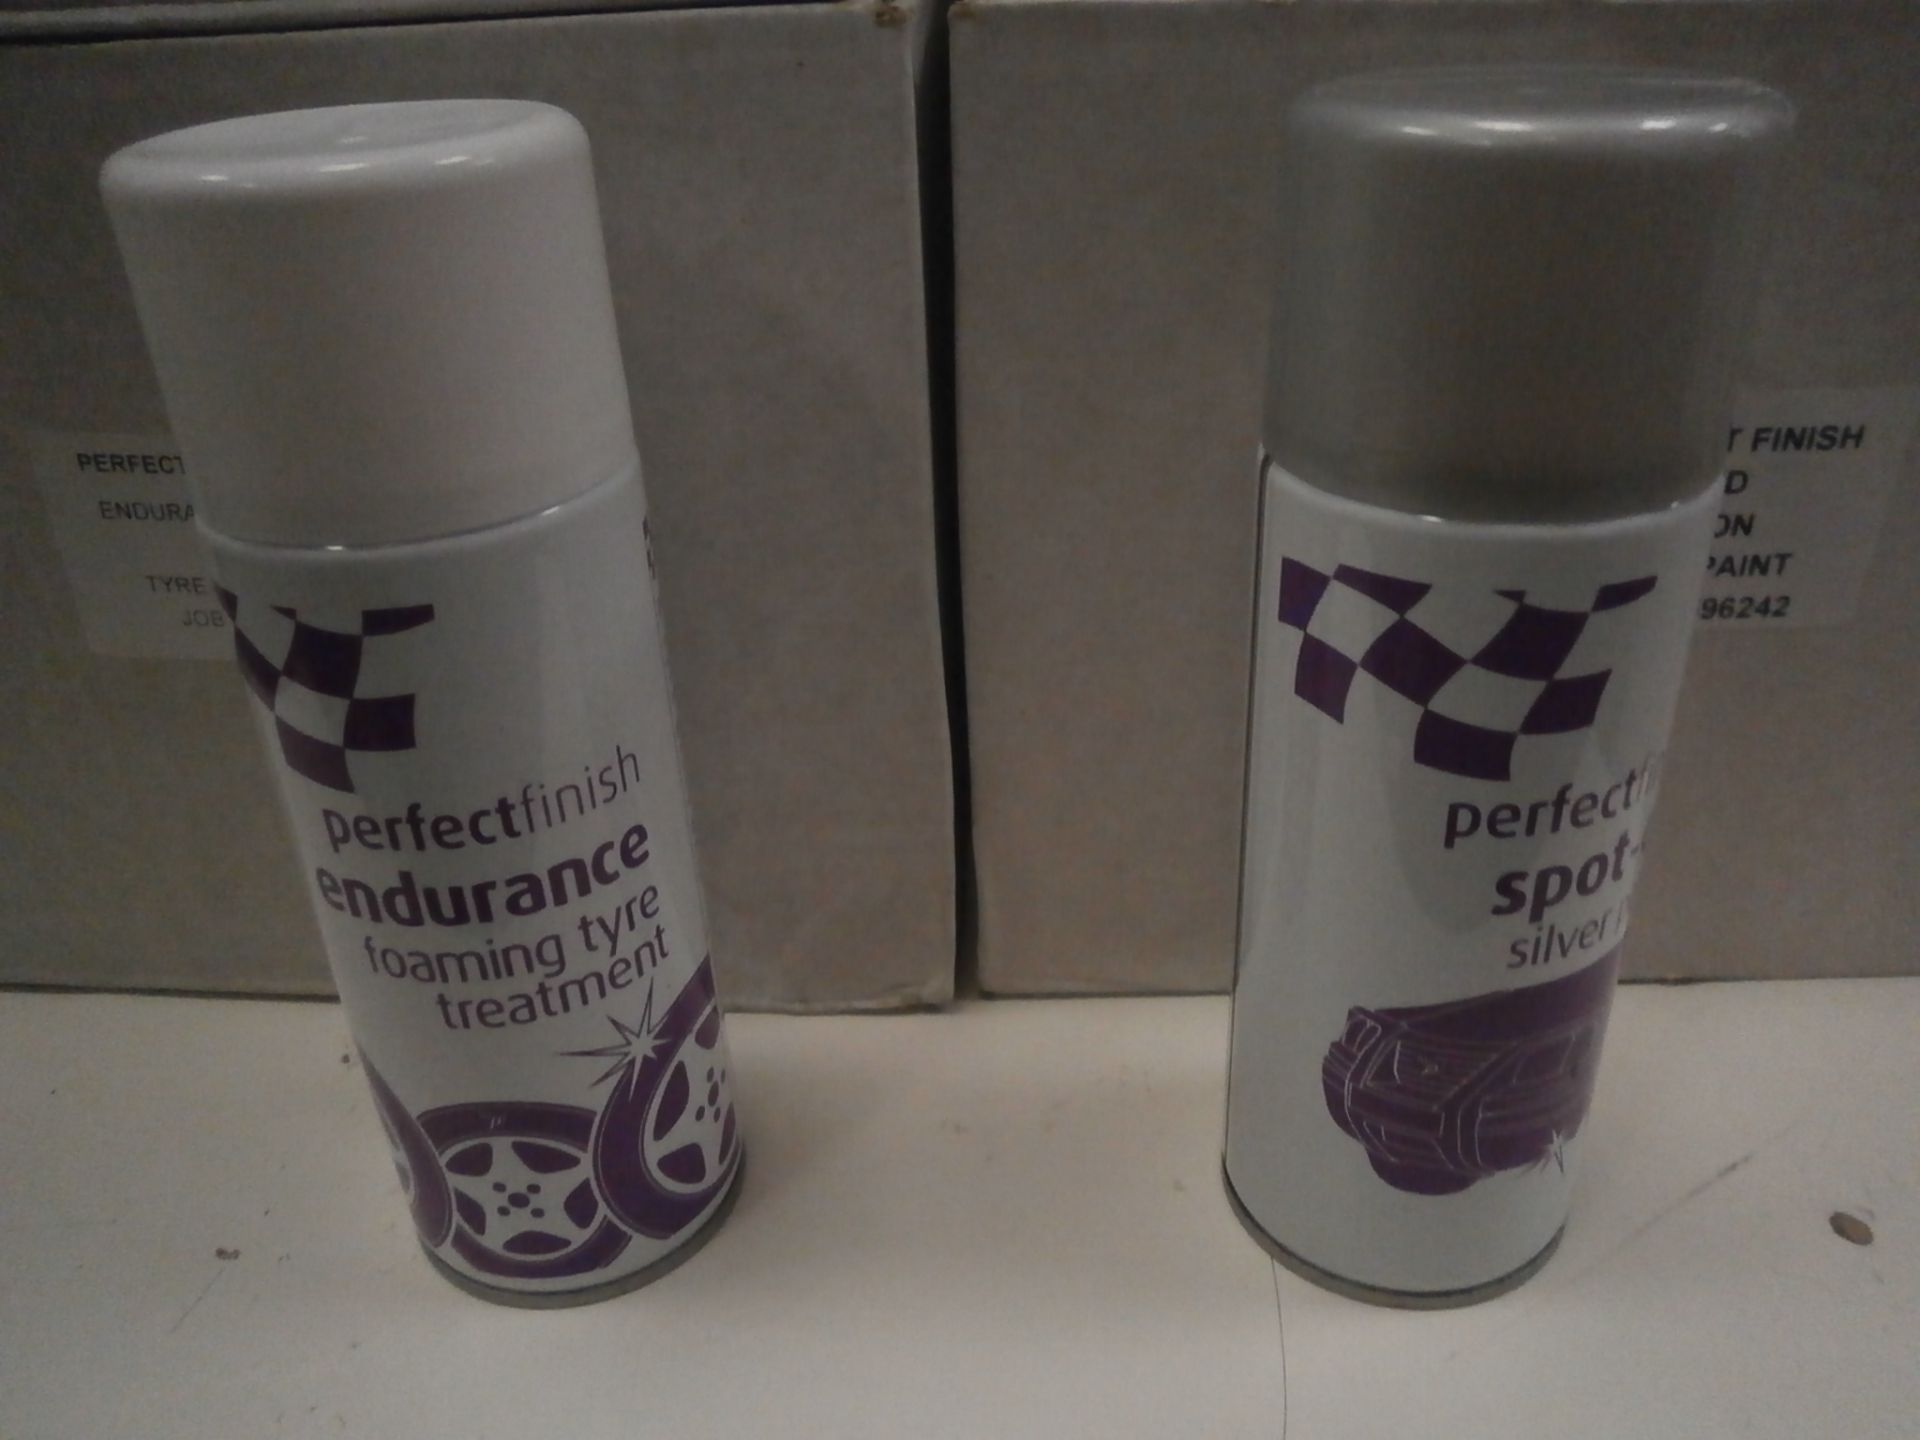 2 Boxes PerfectFinish Endurance Foaming Tyre Treatment 12 and 1 box of Perfectfinish Spot On - Image 2 of 2